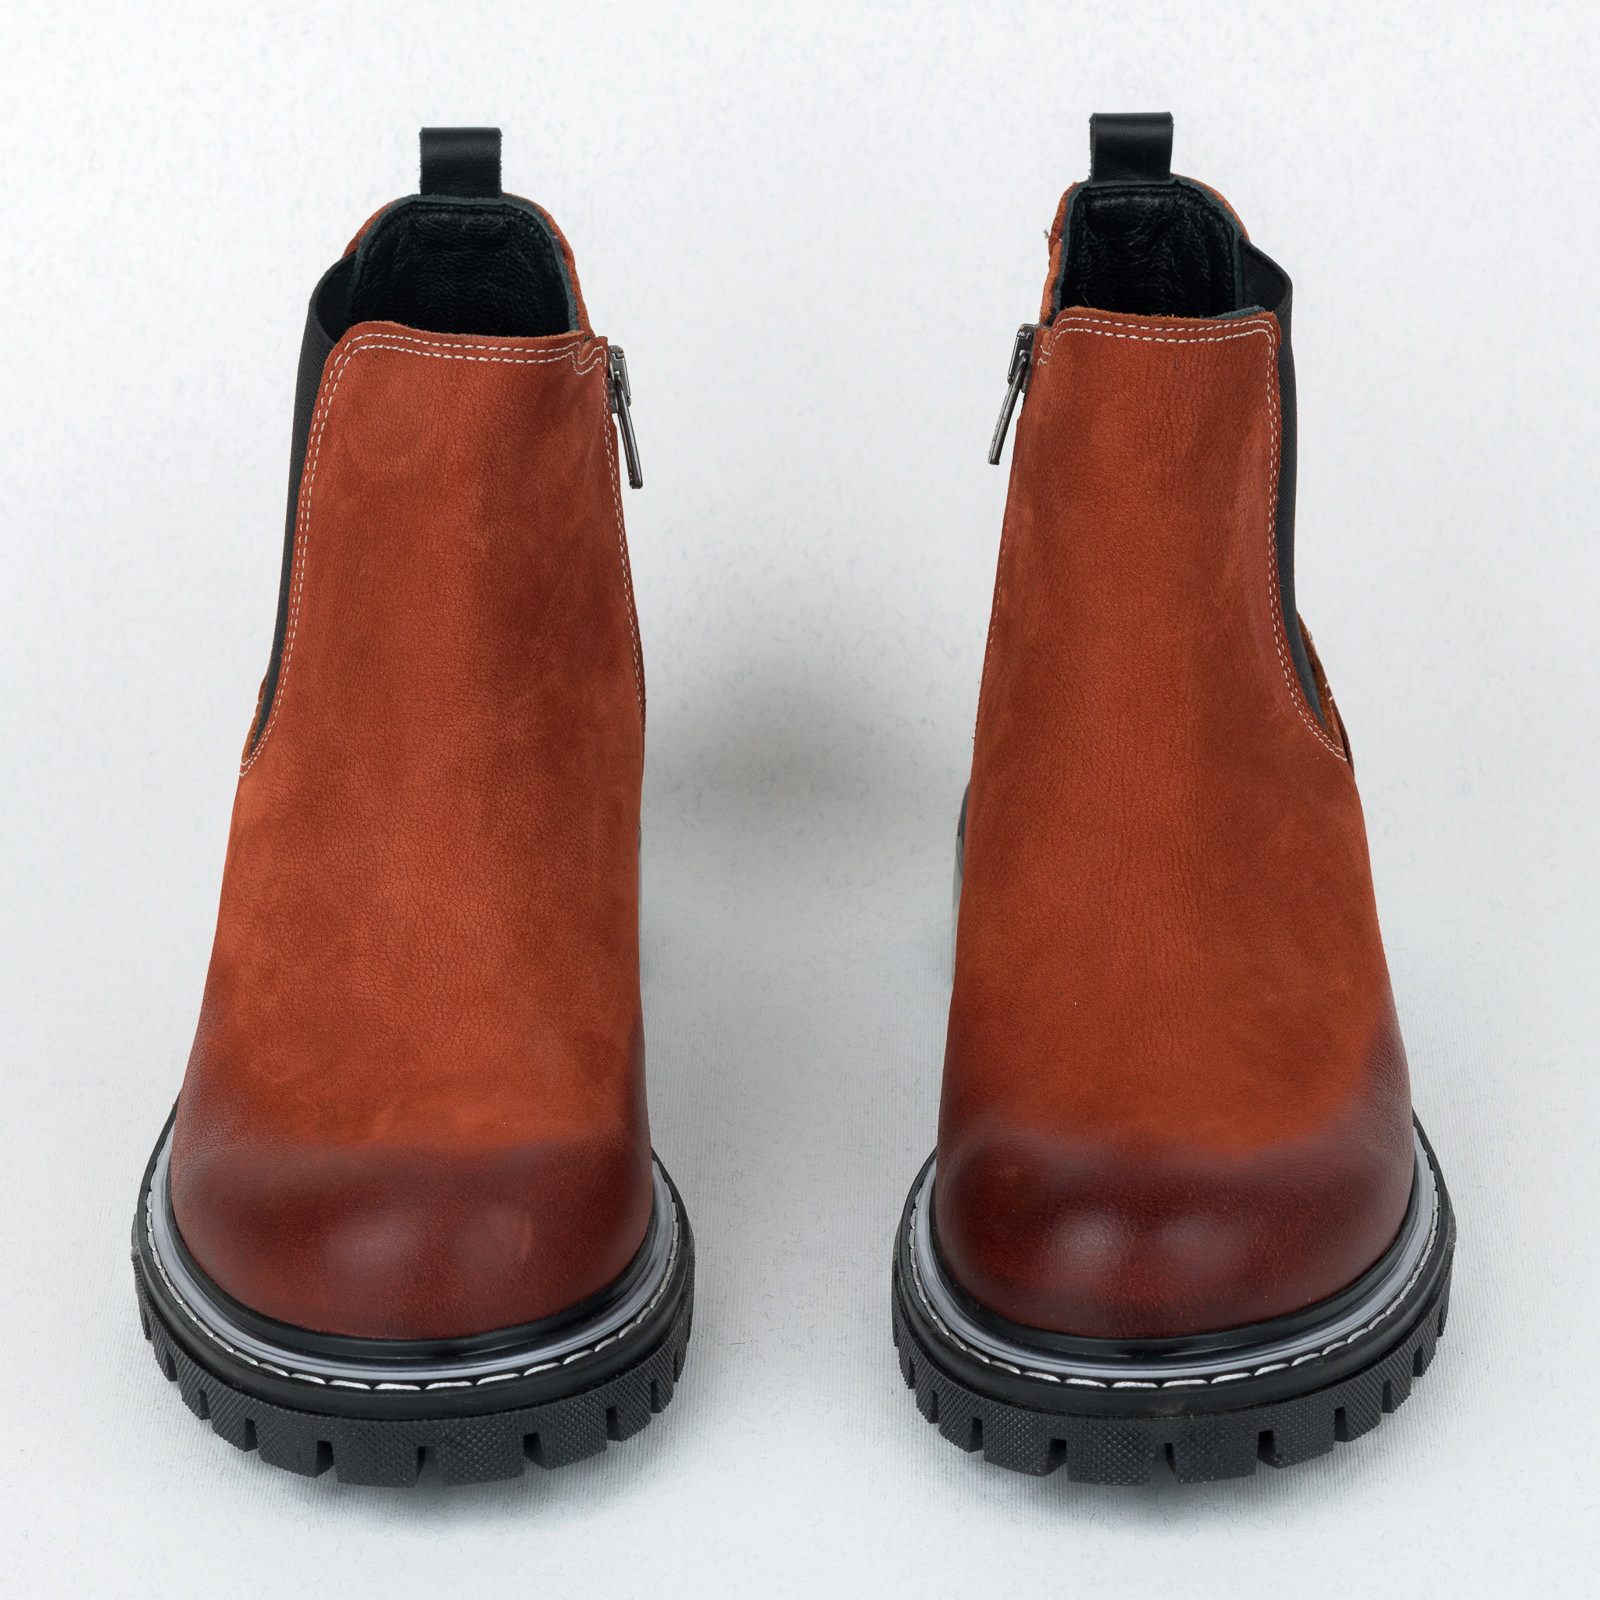 Leather ankle boots B313 - ORANGE